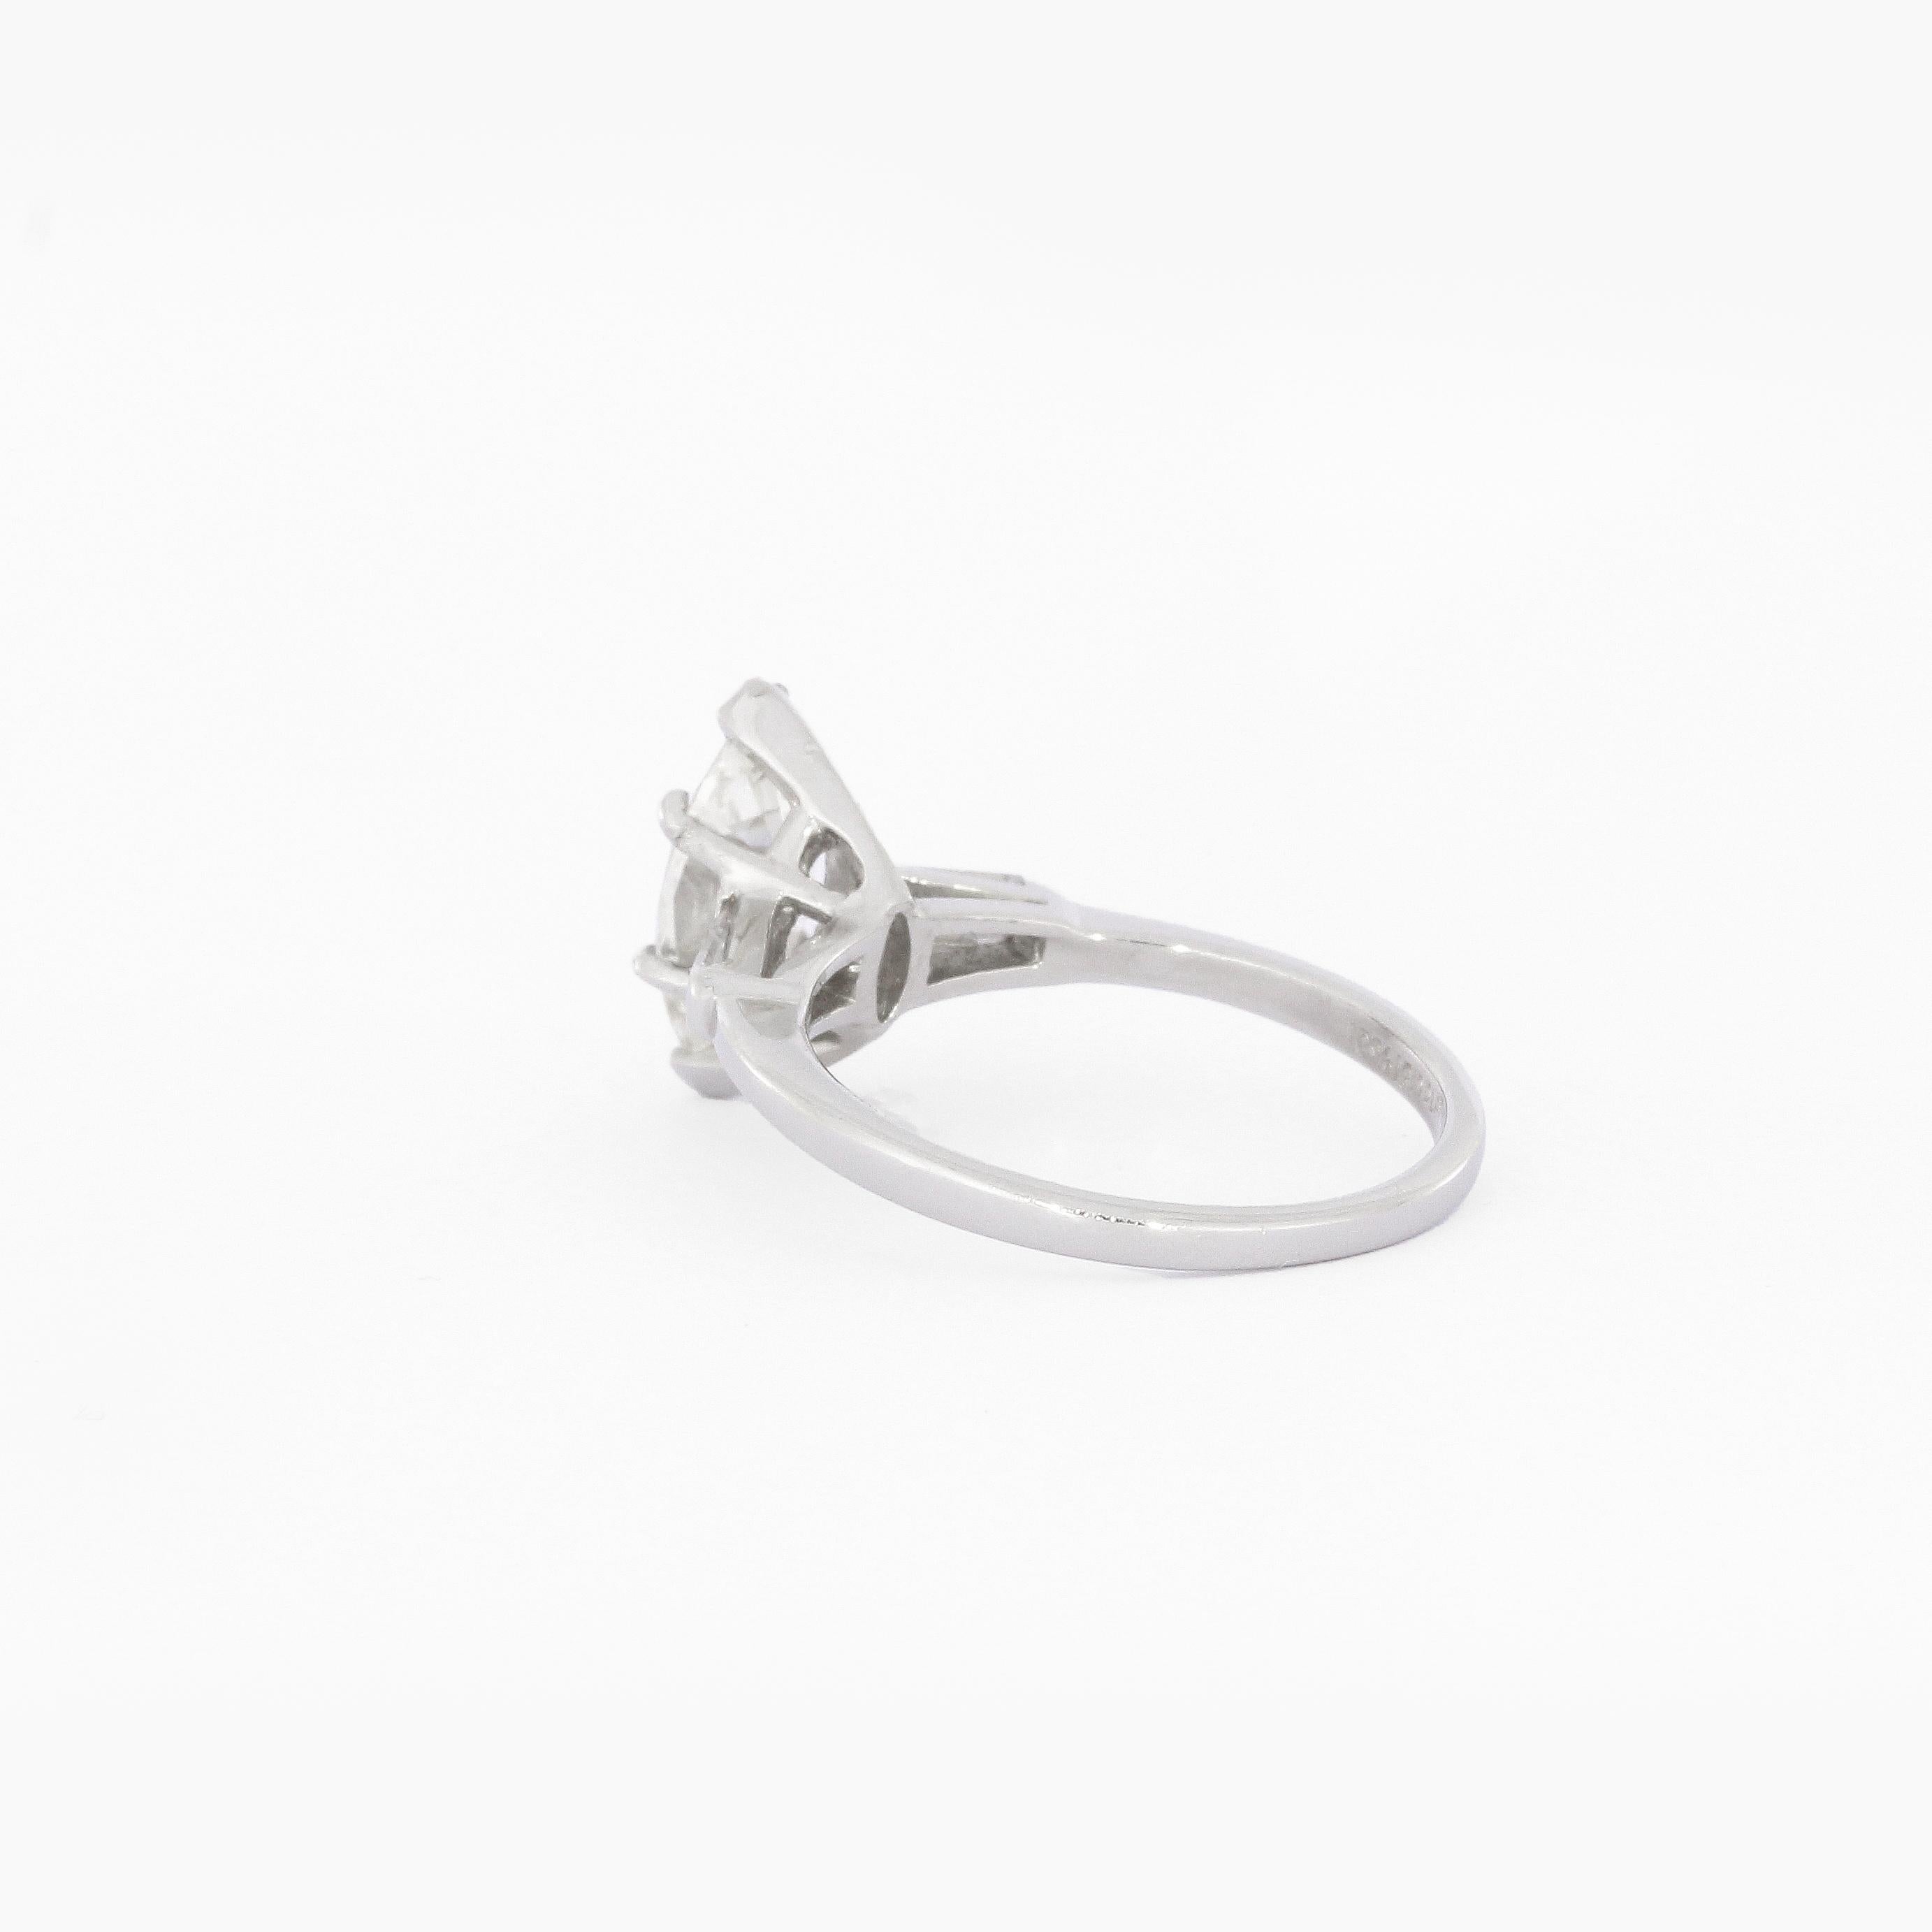 Marquise Cut 1.01 Carat Diamond Solitaire Ring in Platinum In Good Condition For Sale In Berlin, DE